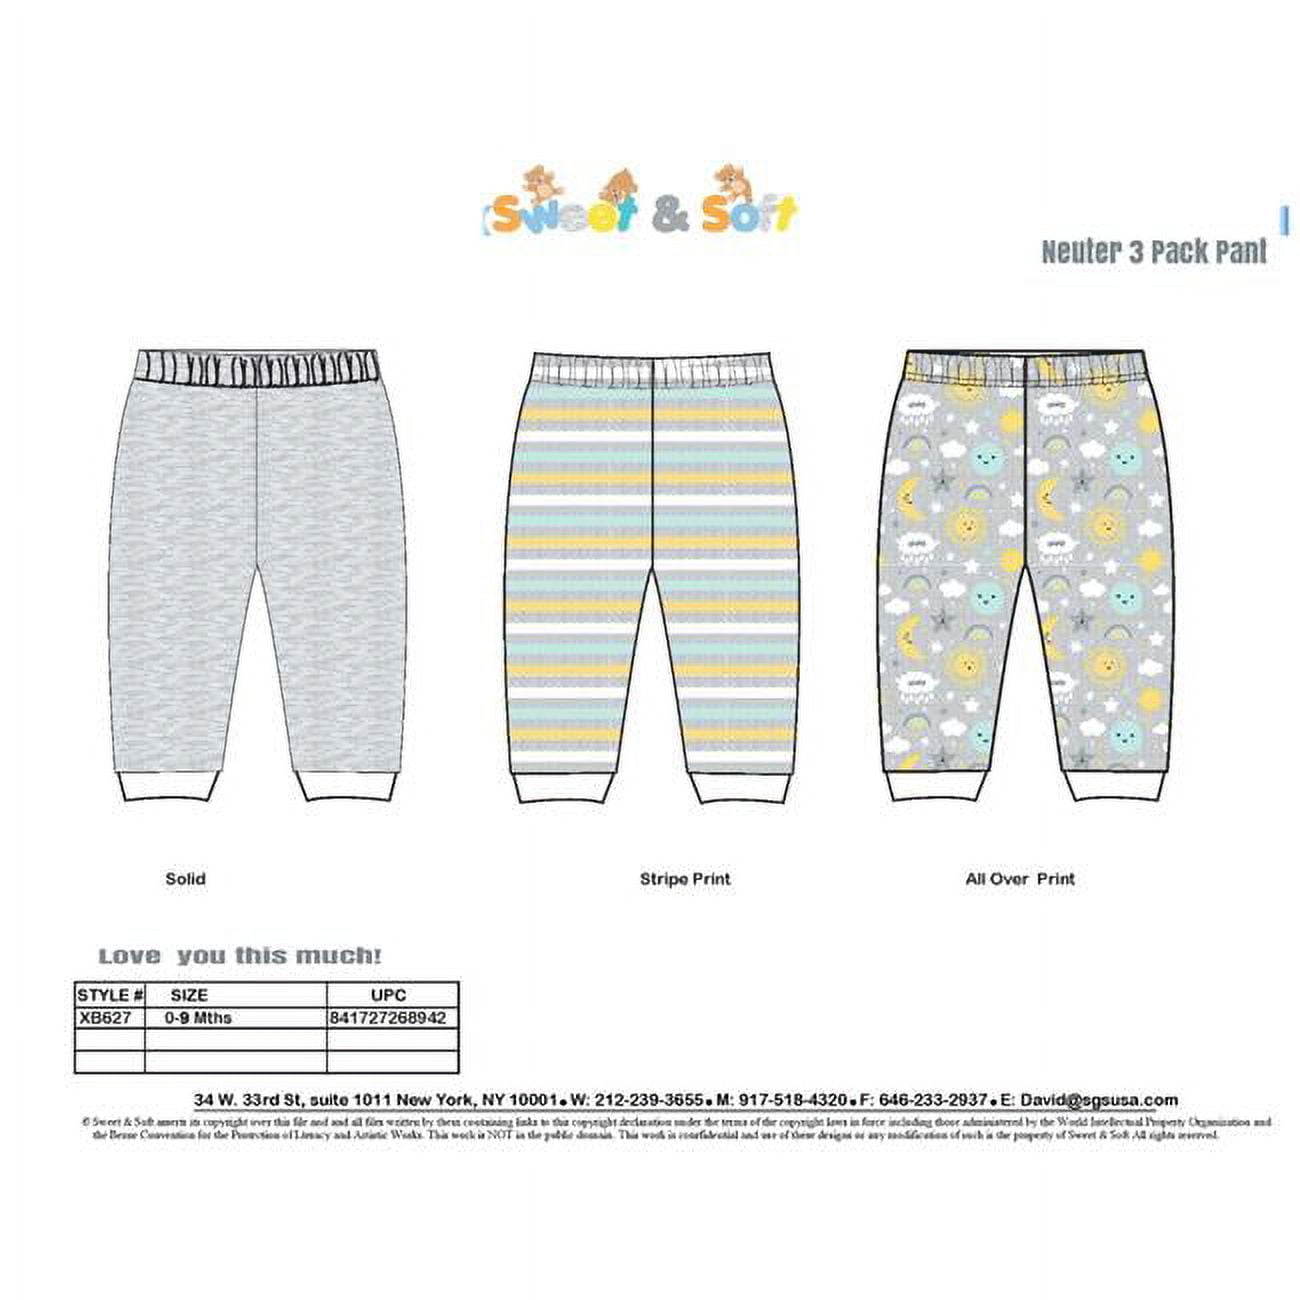 2363798 Babies Pants with Clouds, Grey, Yellow & Mint - Size 0-9M - 3 Per Pack - Case of 24 -  Sweet & Soft